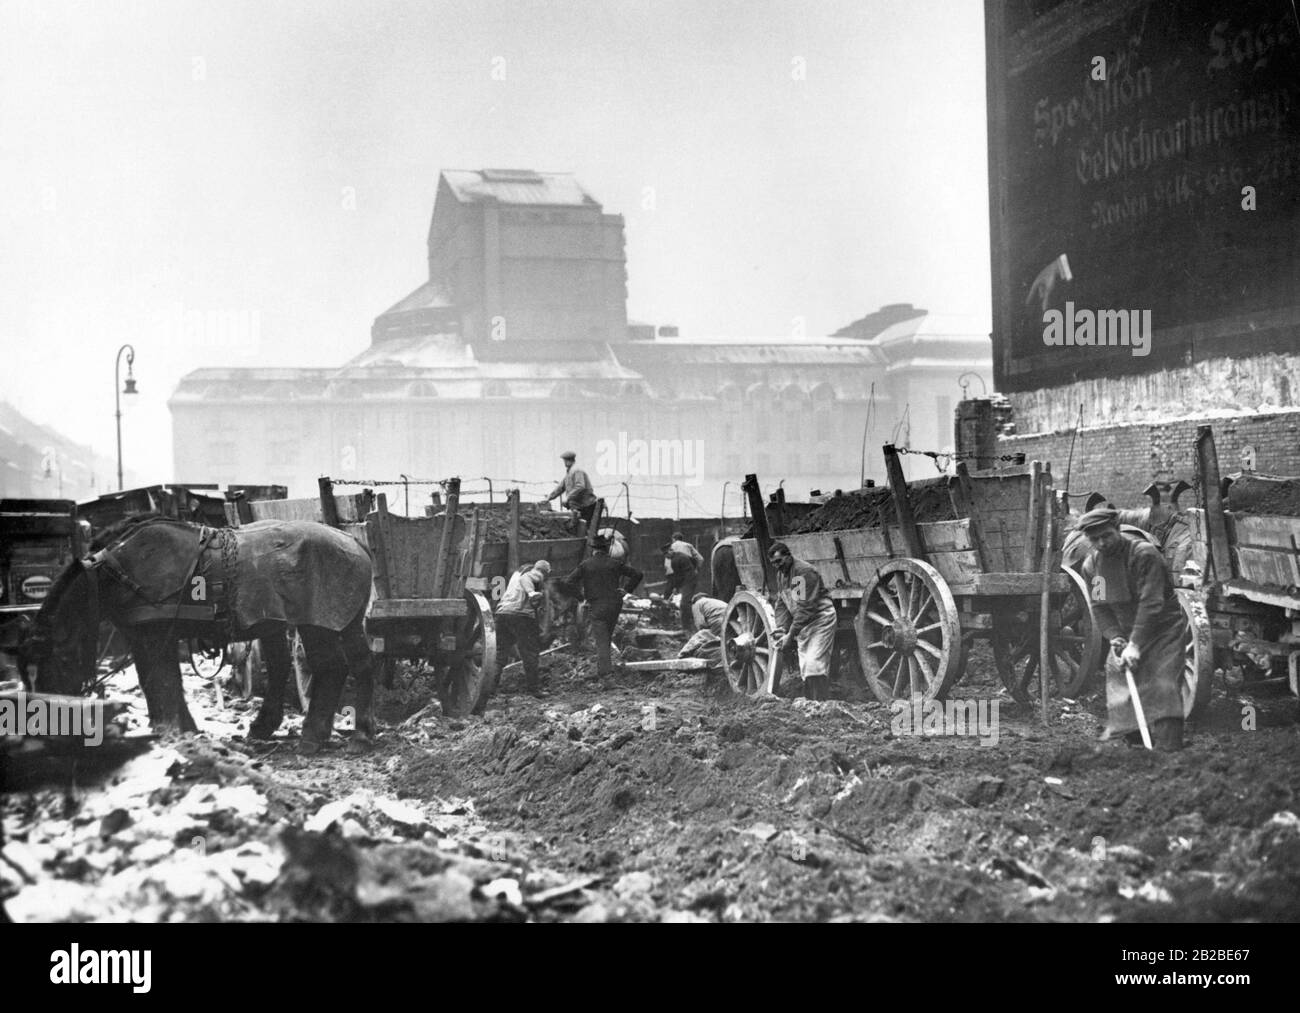 Demolition of the former slum area, the Scheunenviertel, in Berlin. The district was fiercely contested during the street fighting in 1919. The picture shows construction worker loading the first demolition ruins on horse-drawn car. Stock Photo